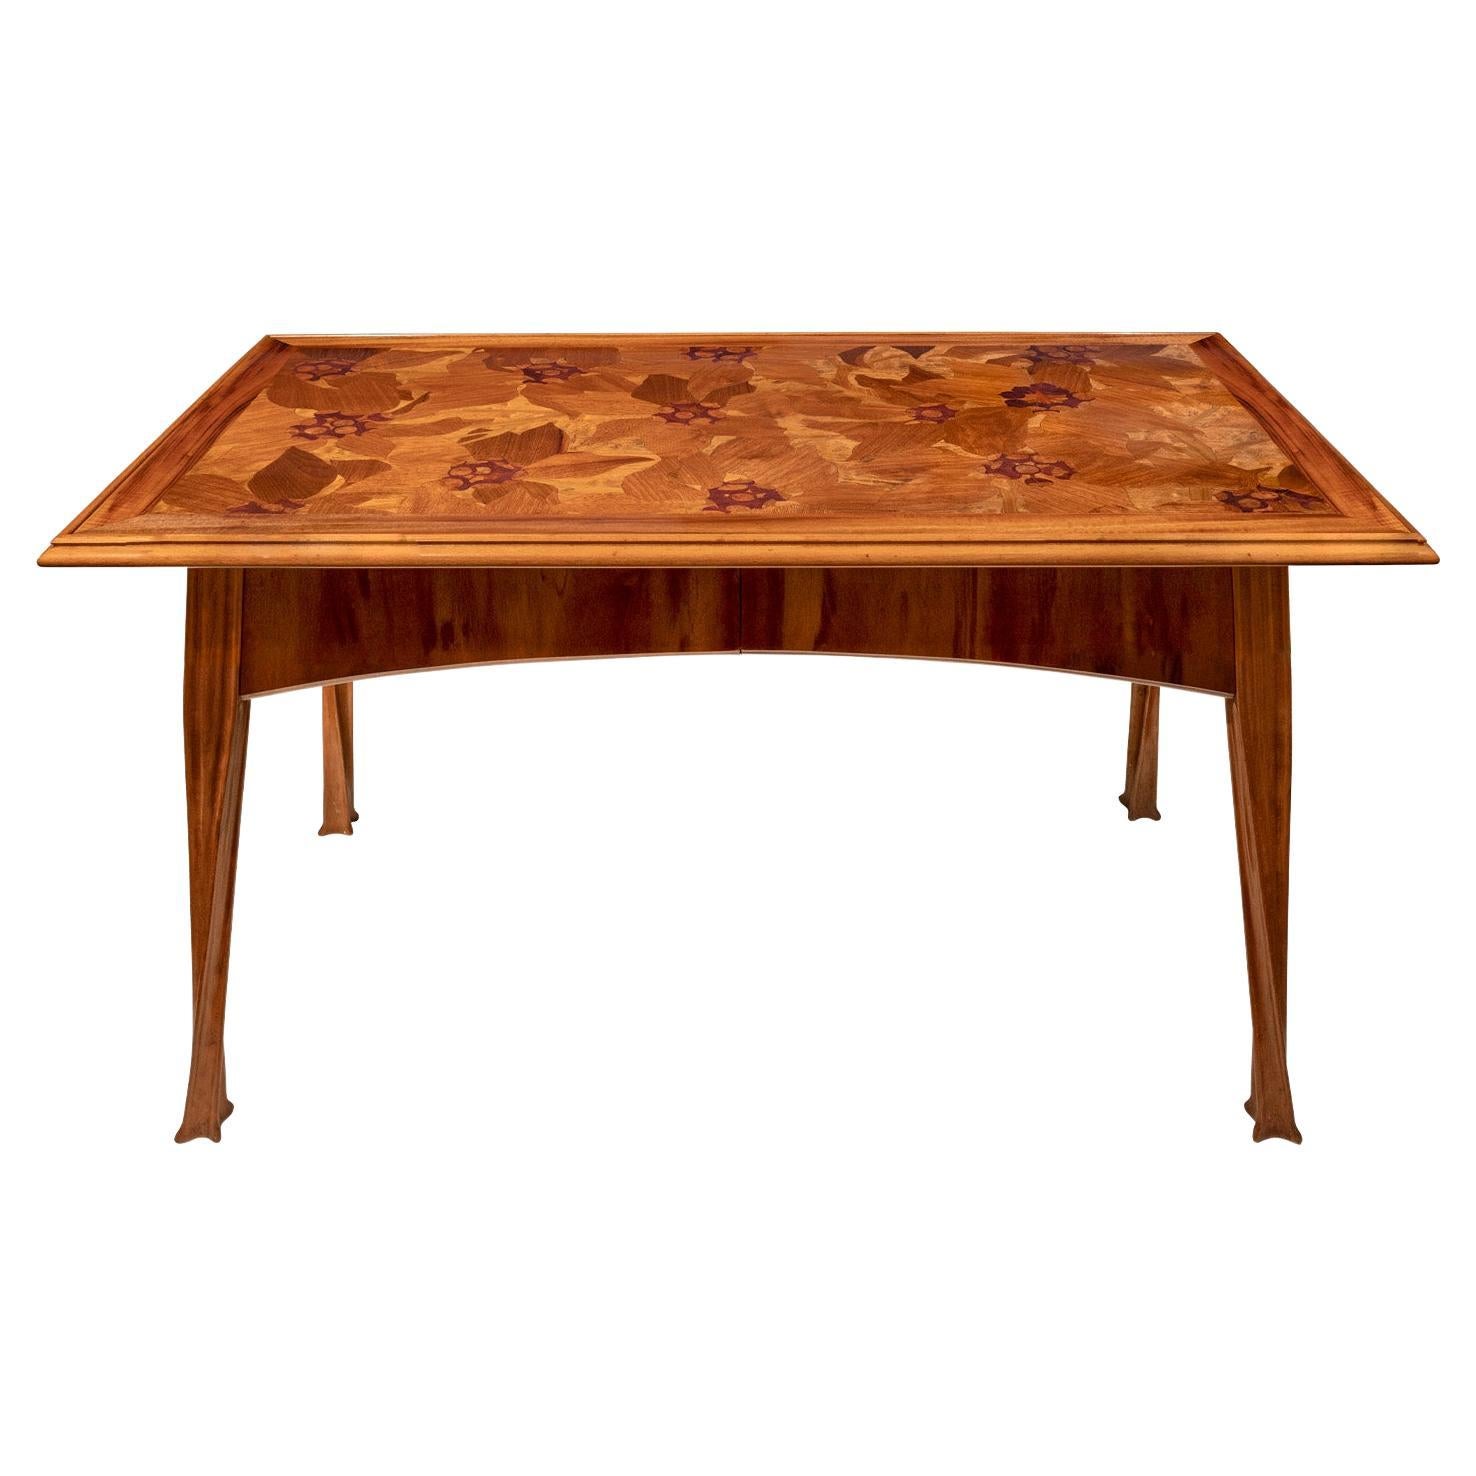 Louis Majorelle Rare Writing Desk with Botanical Inlays ca. 1900 (Signed)